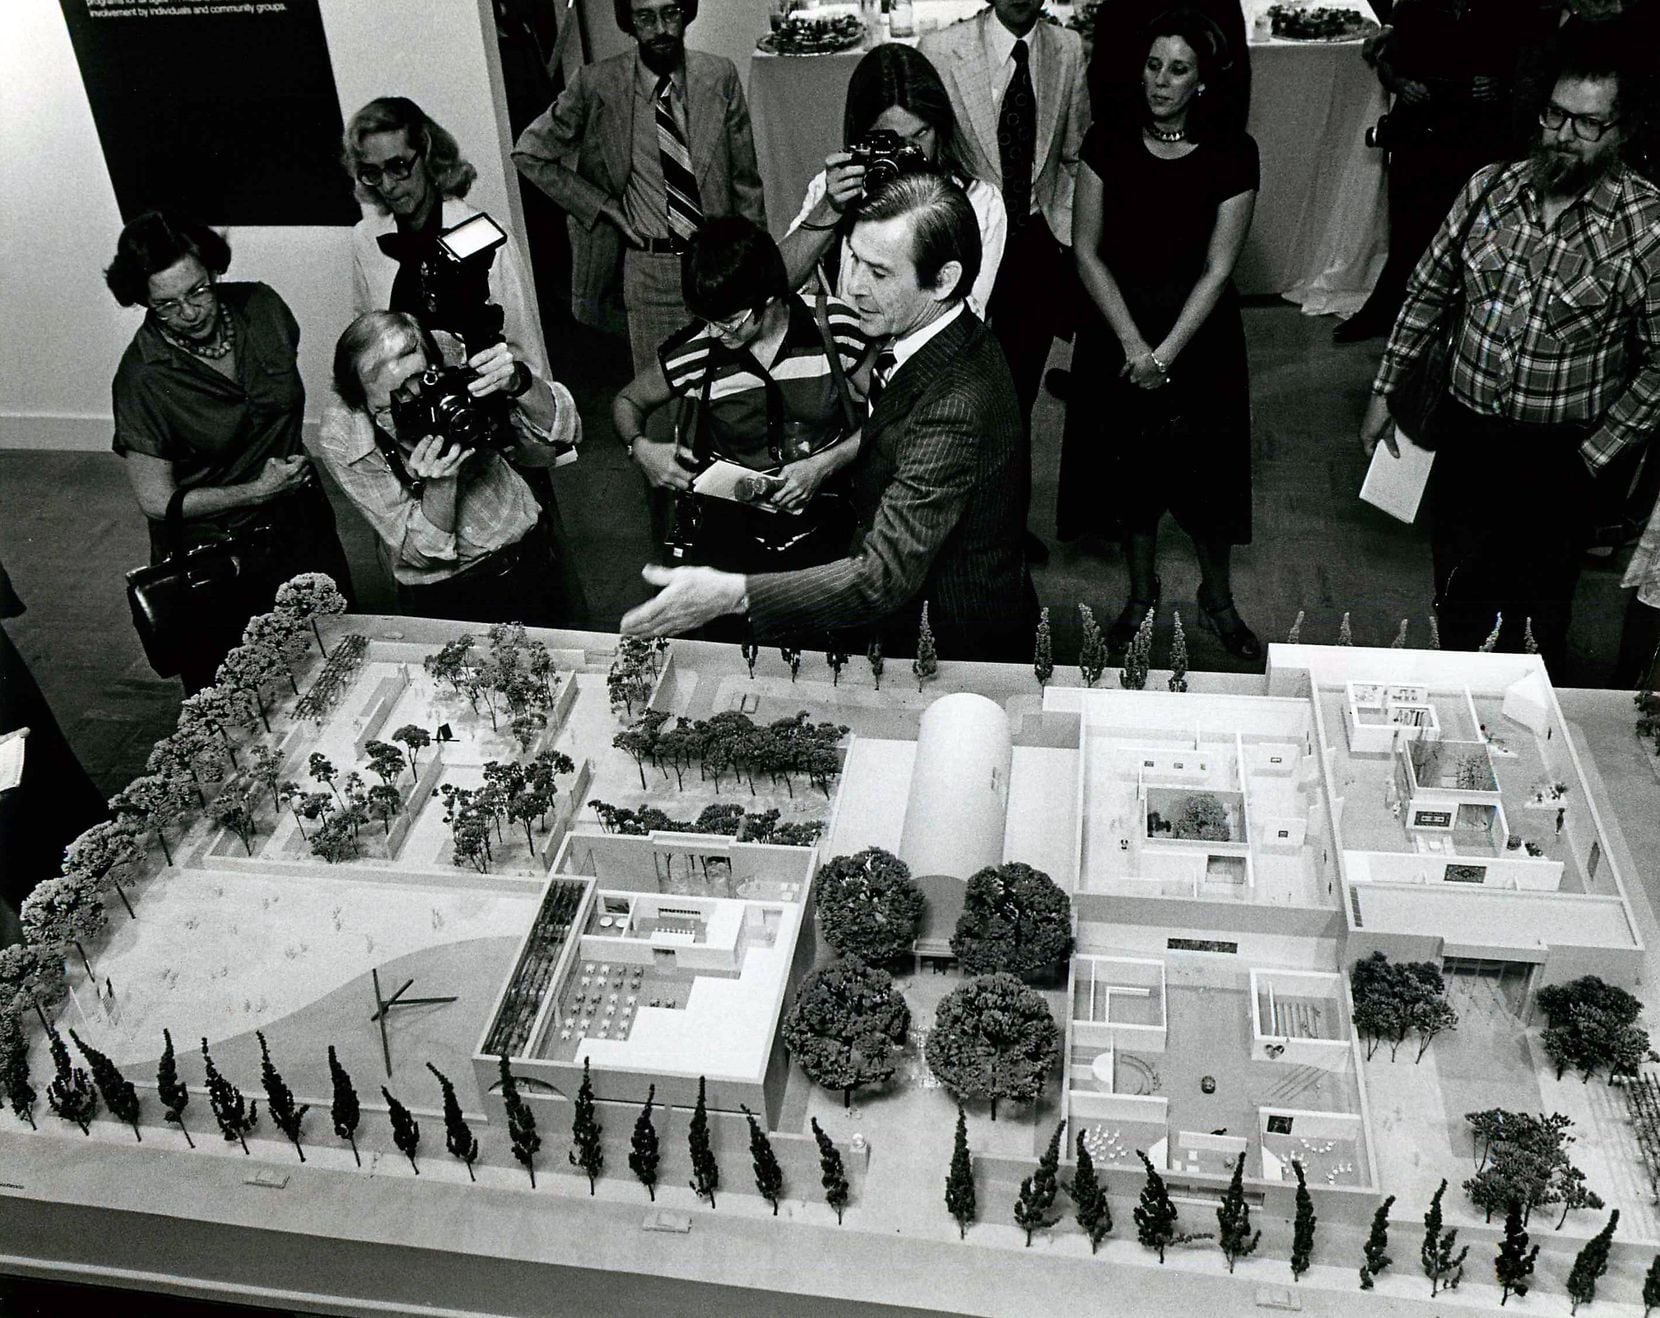 PUBLISHED September 14, 1979 - Architect Edward Larrabee Barnes (center) displays a model of the new Dallas Museum of Art.